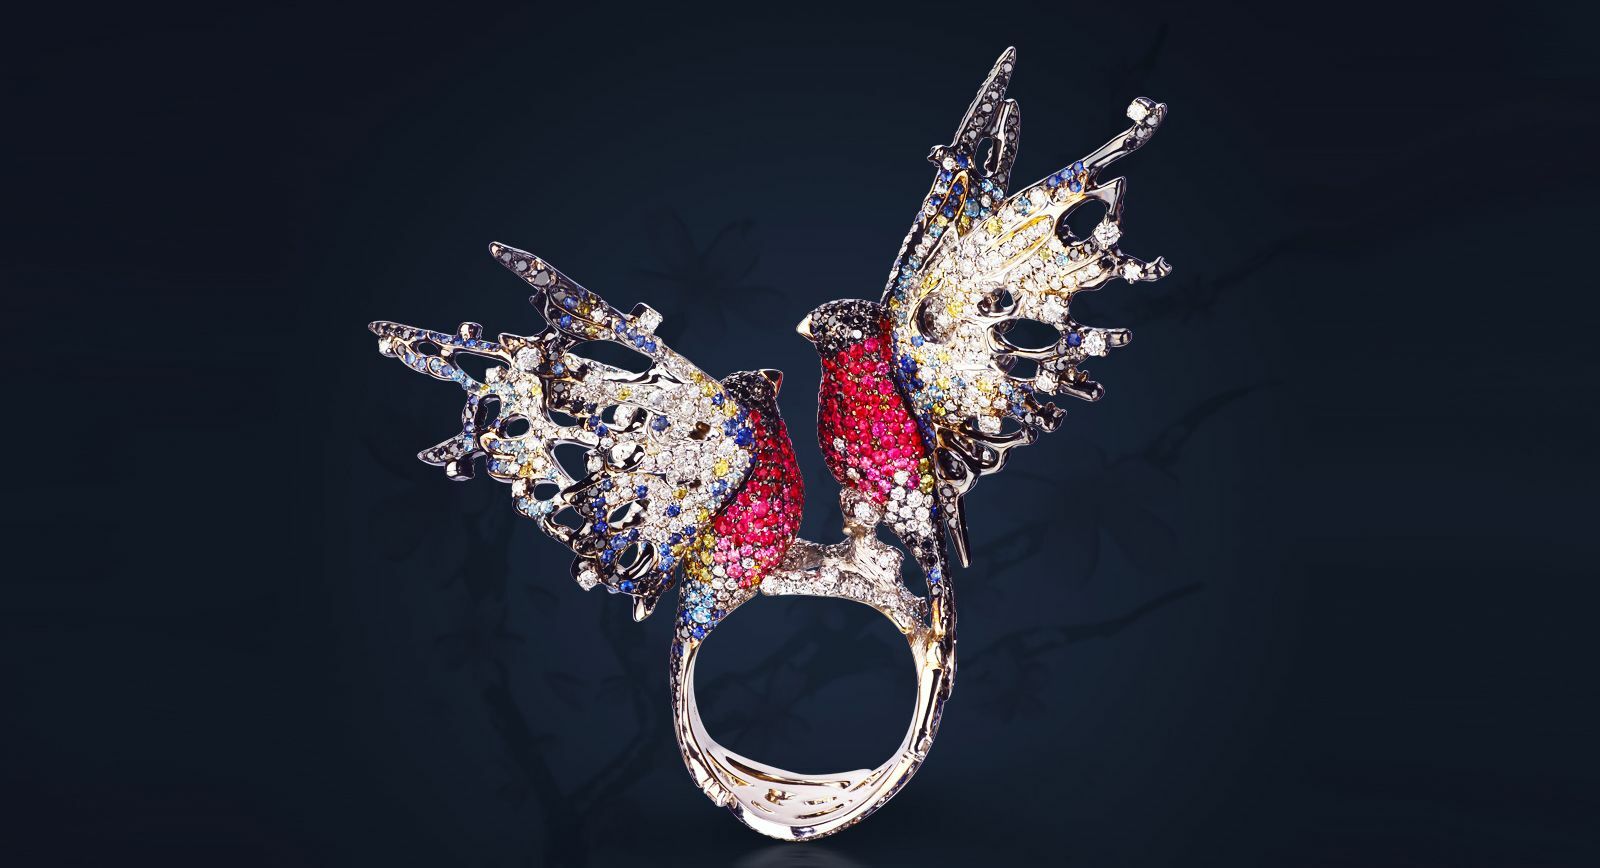 ICHIEN: I Want to Make Jewellery That Can Transform a Person’s Soul